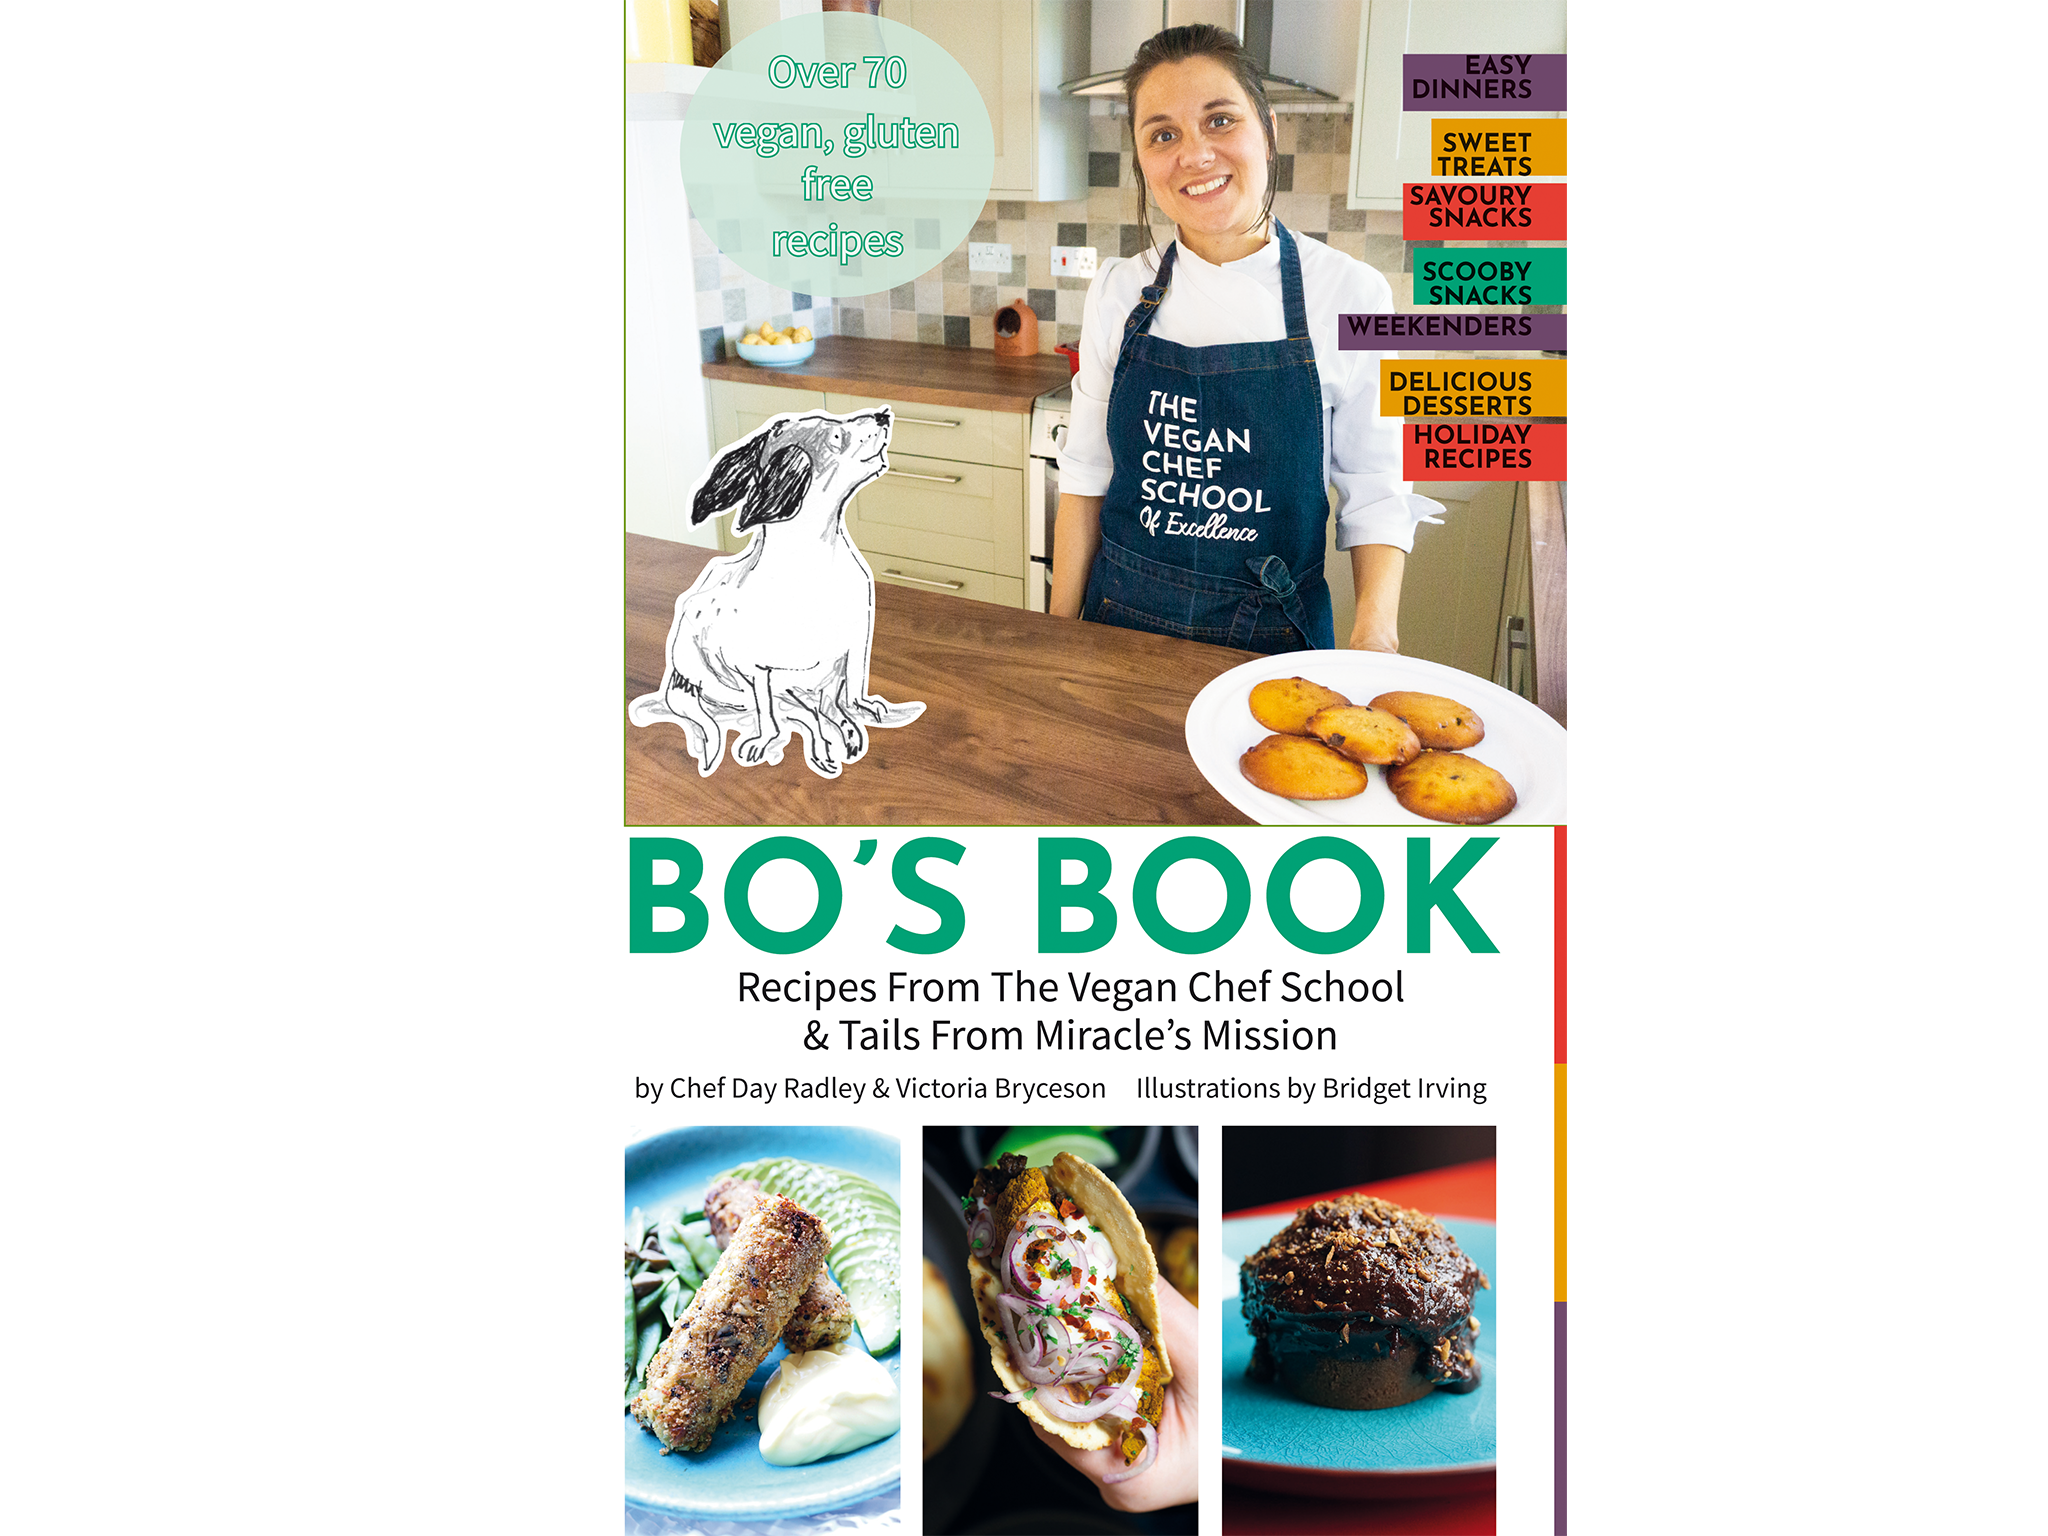 ‘BO’S BOOK’ BY CHEF DAY RADLEY AND VICTORIA BRYCESON